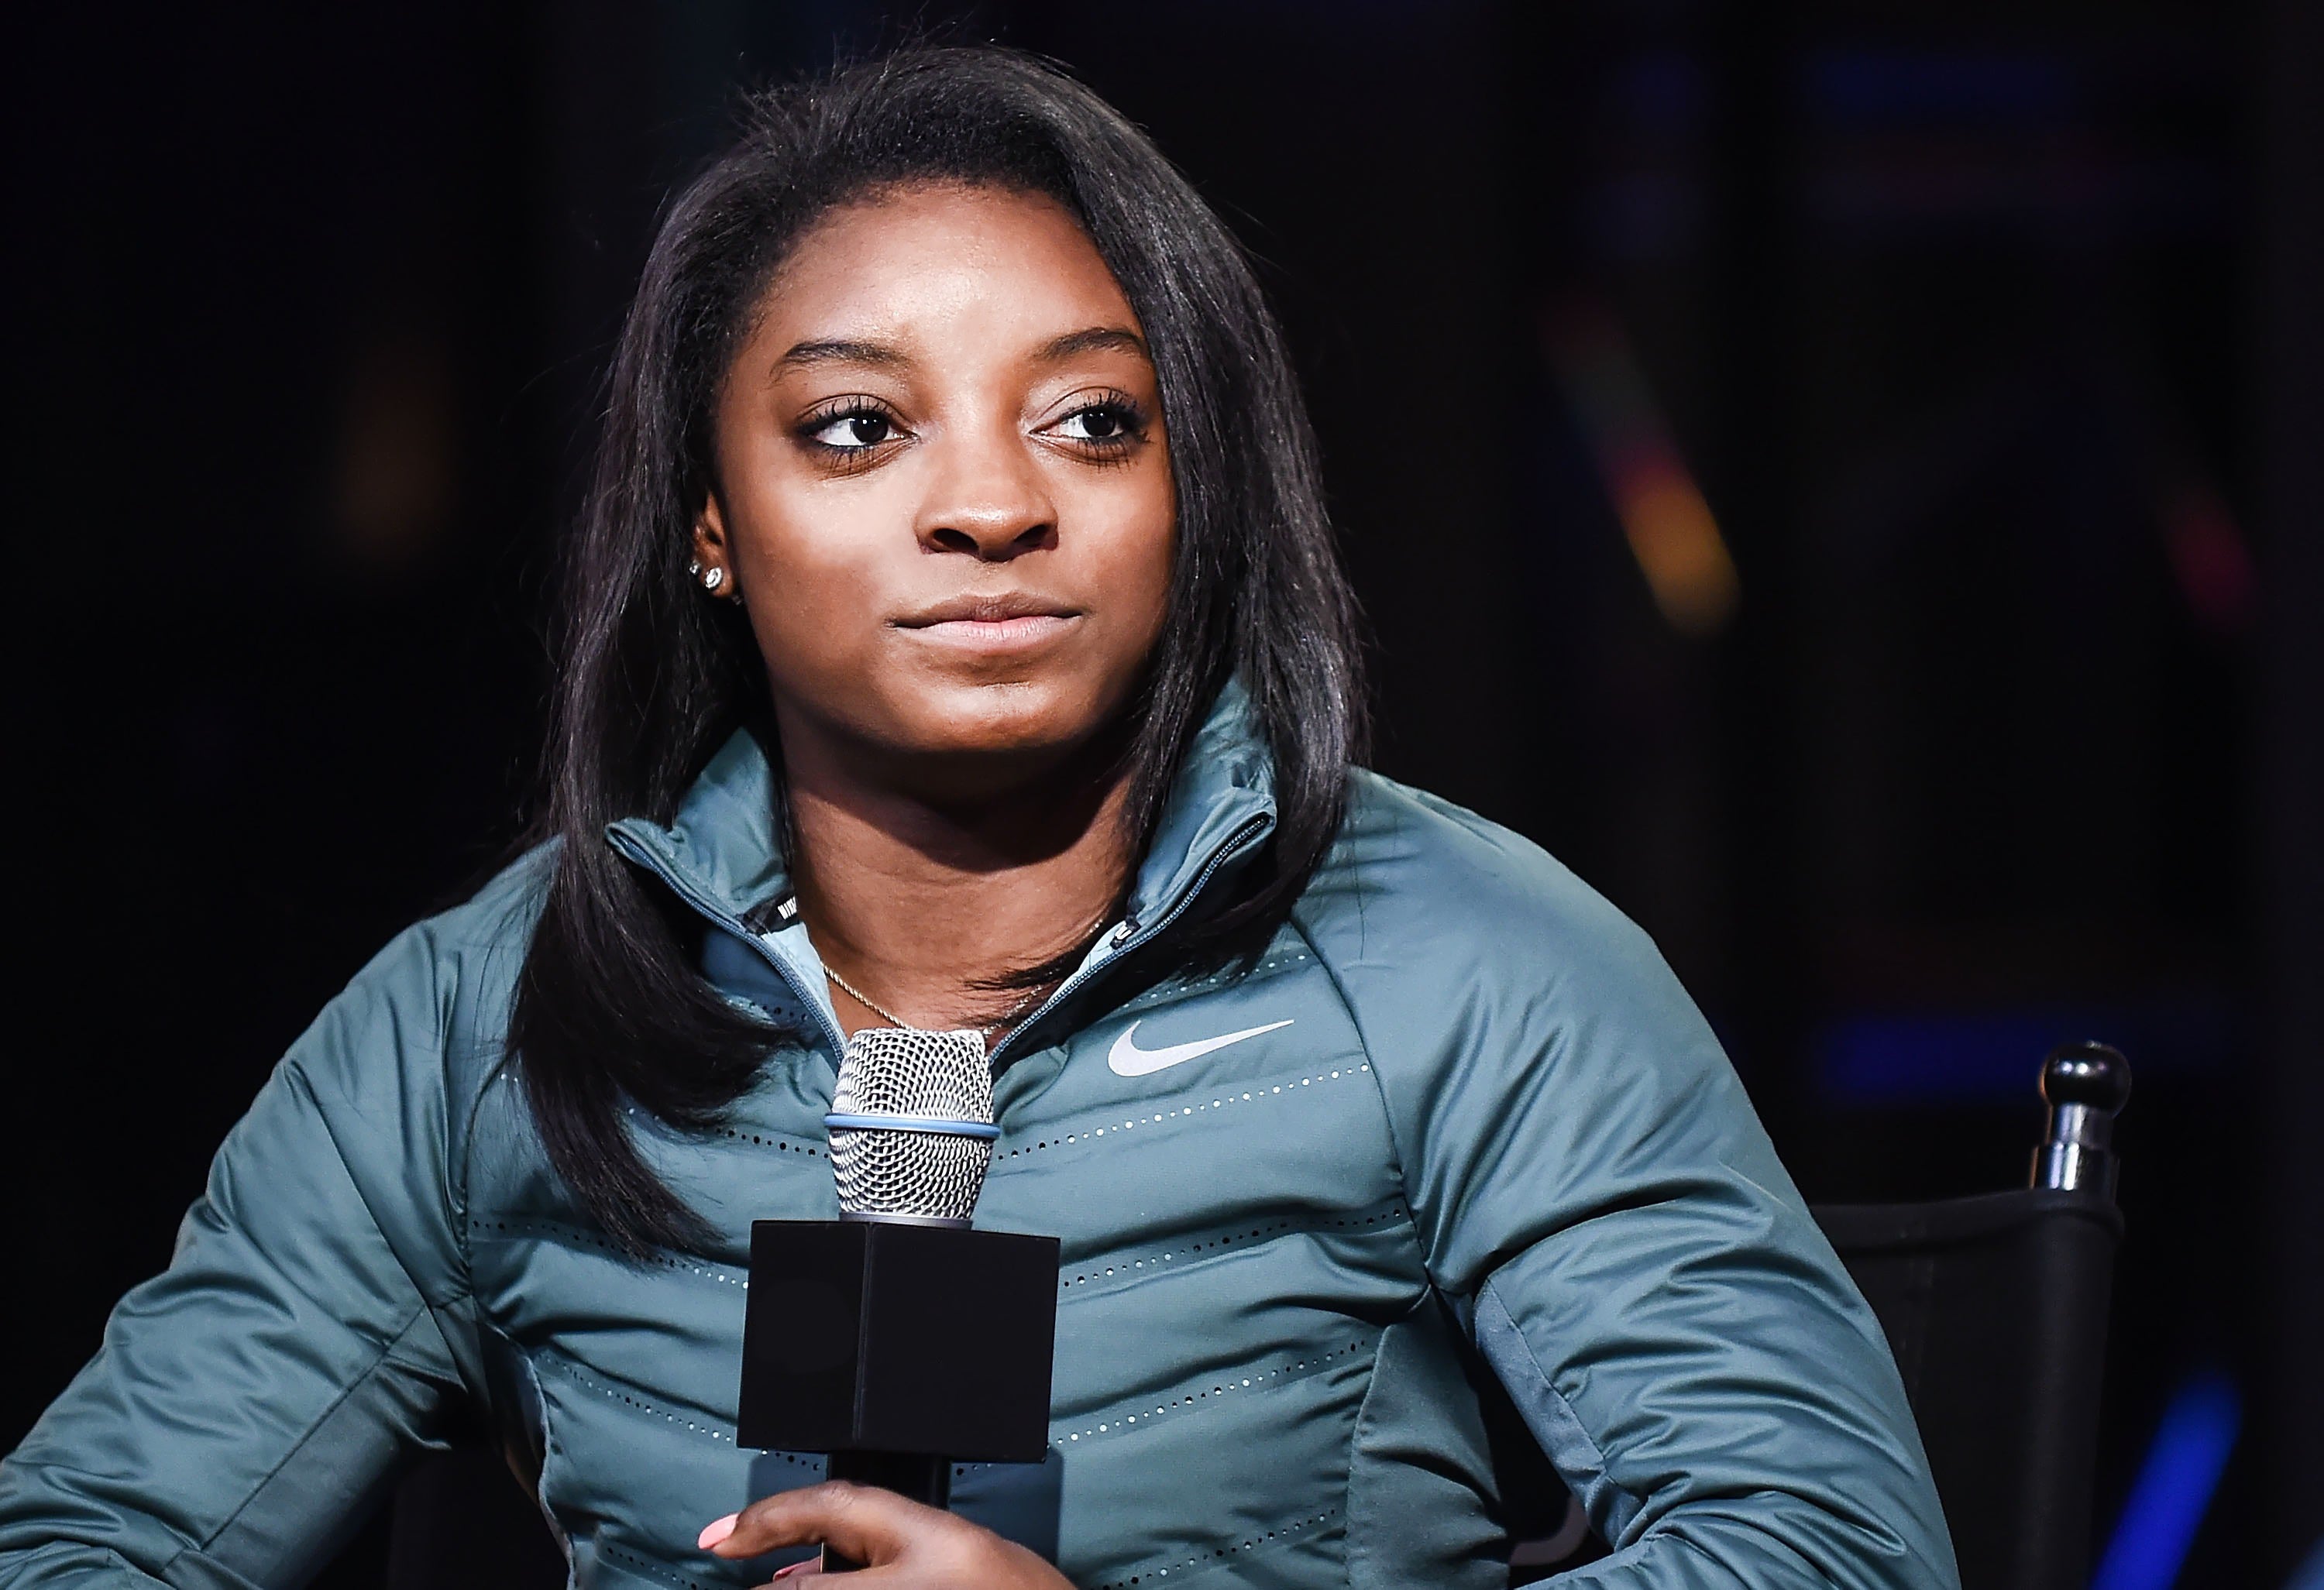 Simone Biles Has The Perfect Response After An Online Hater Called Her A Bad Role Model For Going On Vacation
